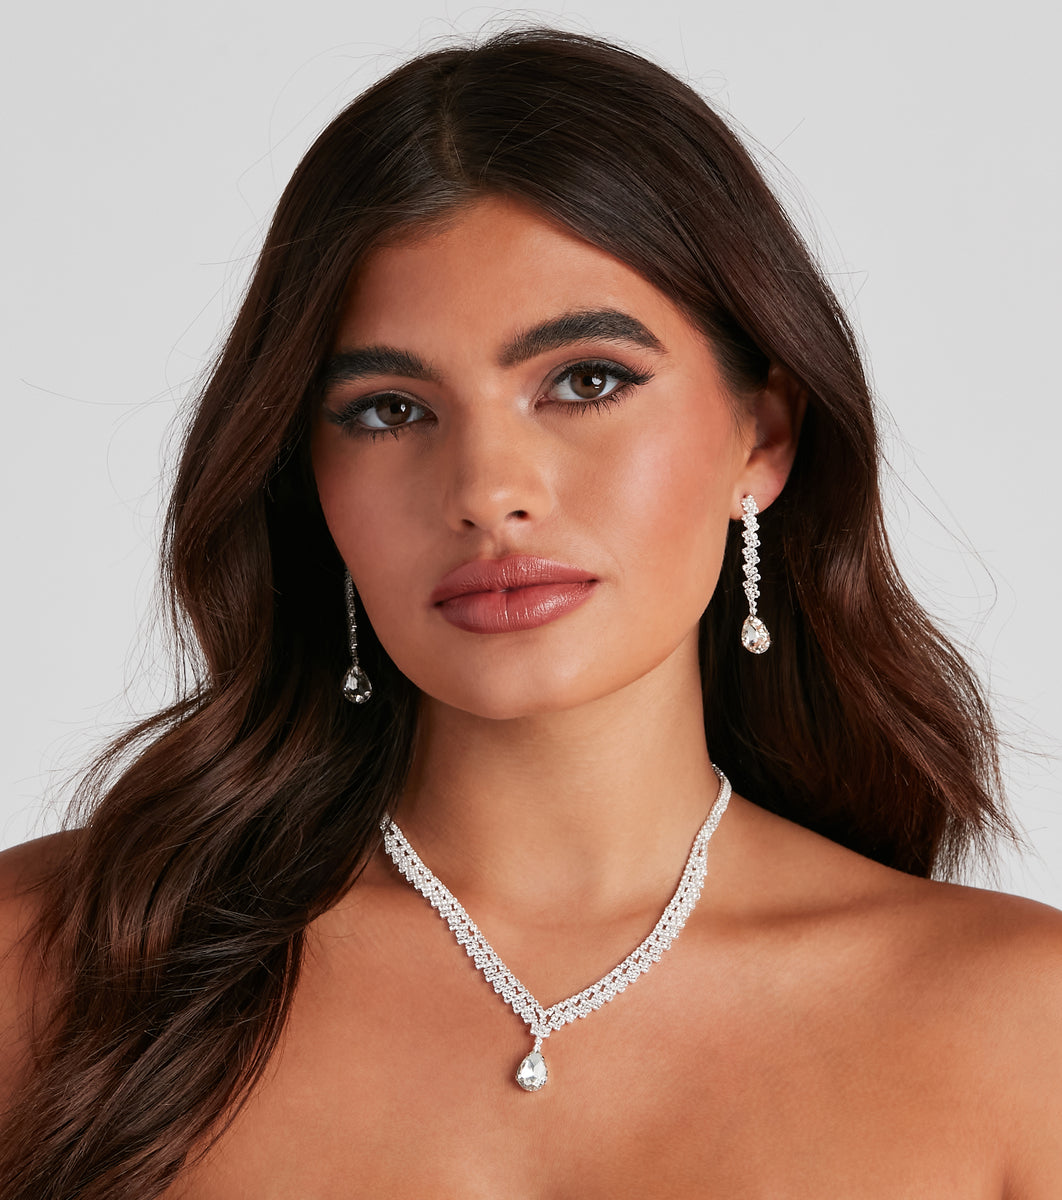 Elegant Affair Necklace And Earrings Set